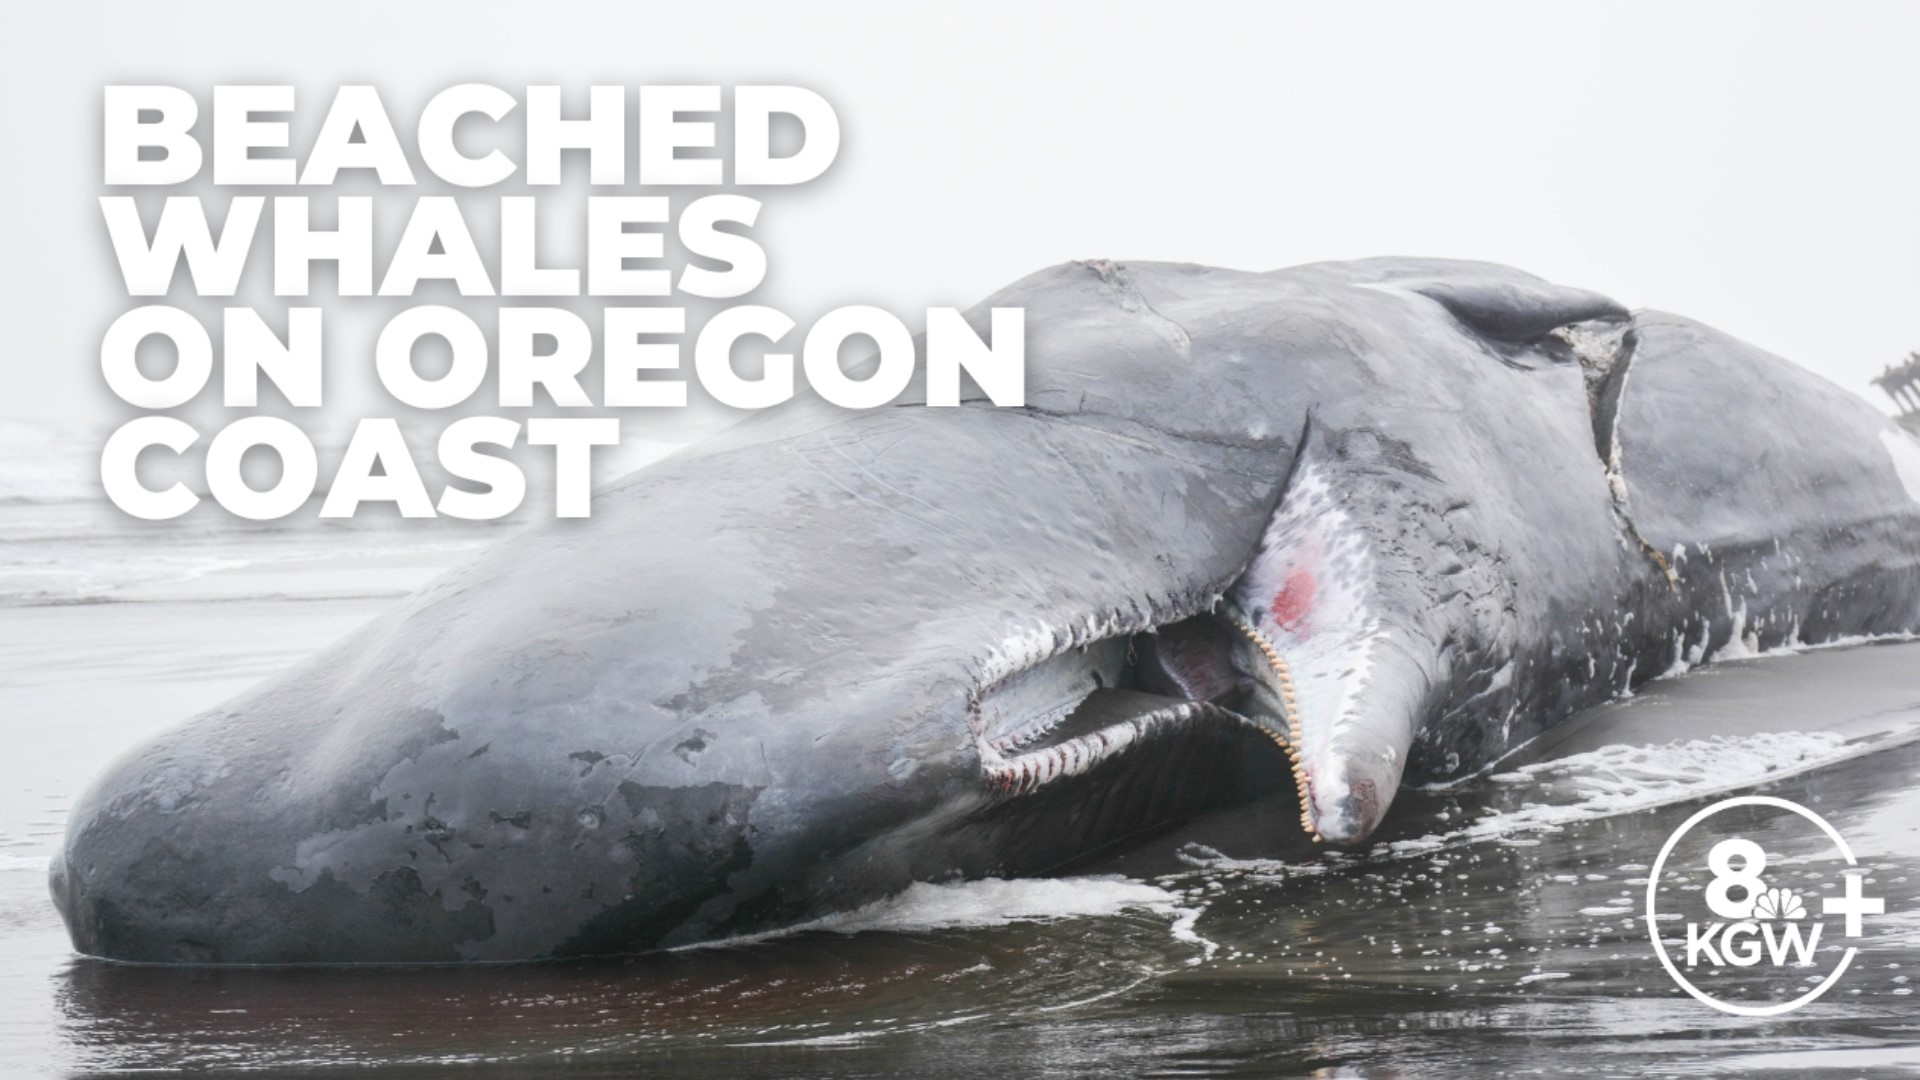 Three whales washed up on the Oregon coast within days of each other. Experts we talked to say it's 'pure coincidence.'